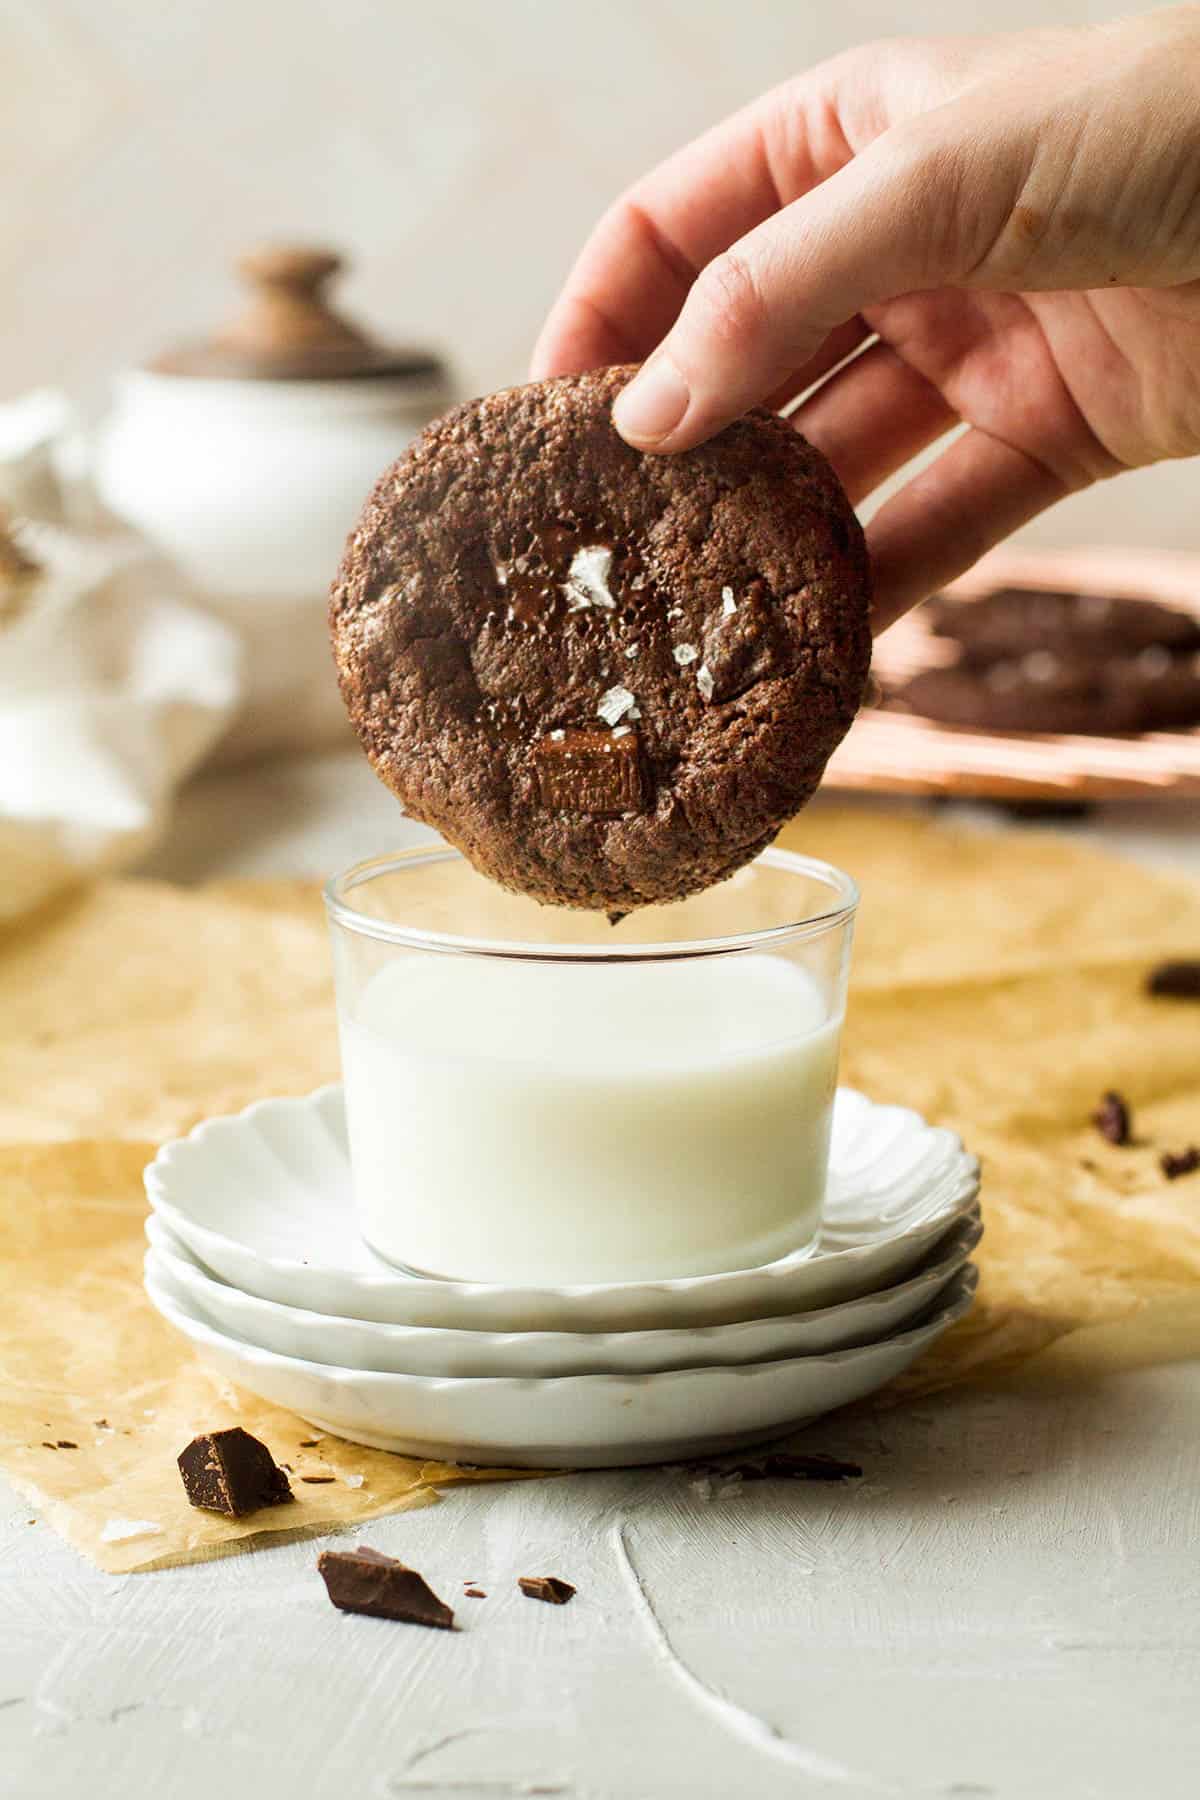 Dipping chocolate caramel cookies in a glass of milk.